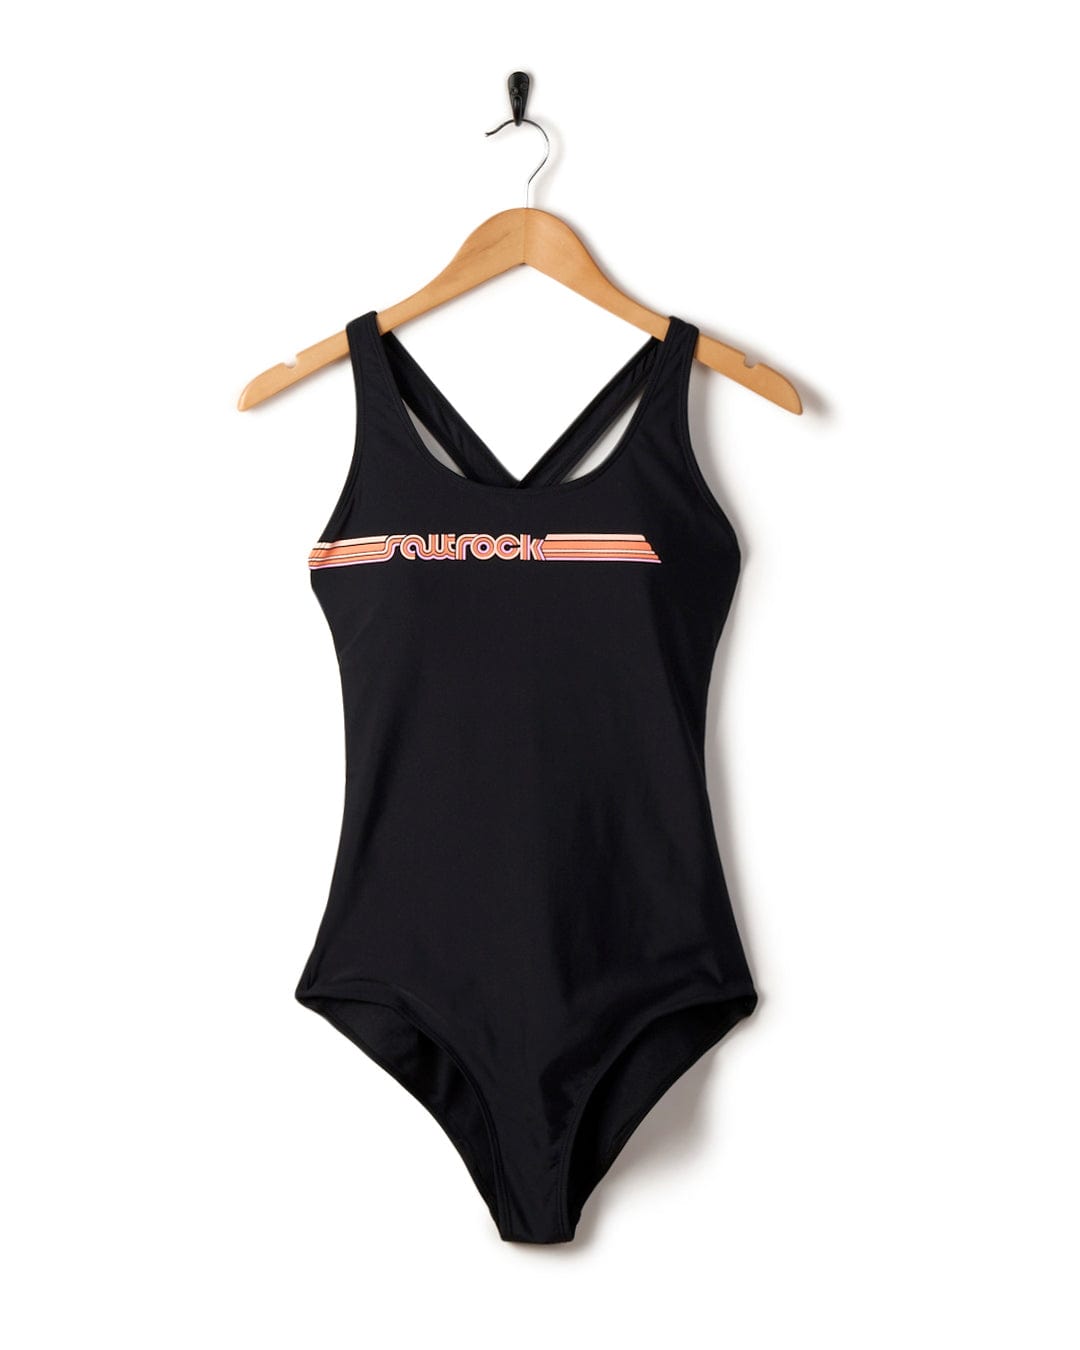 Corrine Retro swimsuit in black with white and pink trim, hanging on a wooden hanger against a white background.